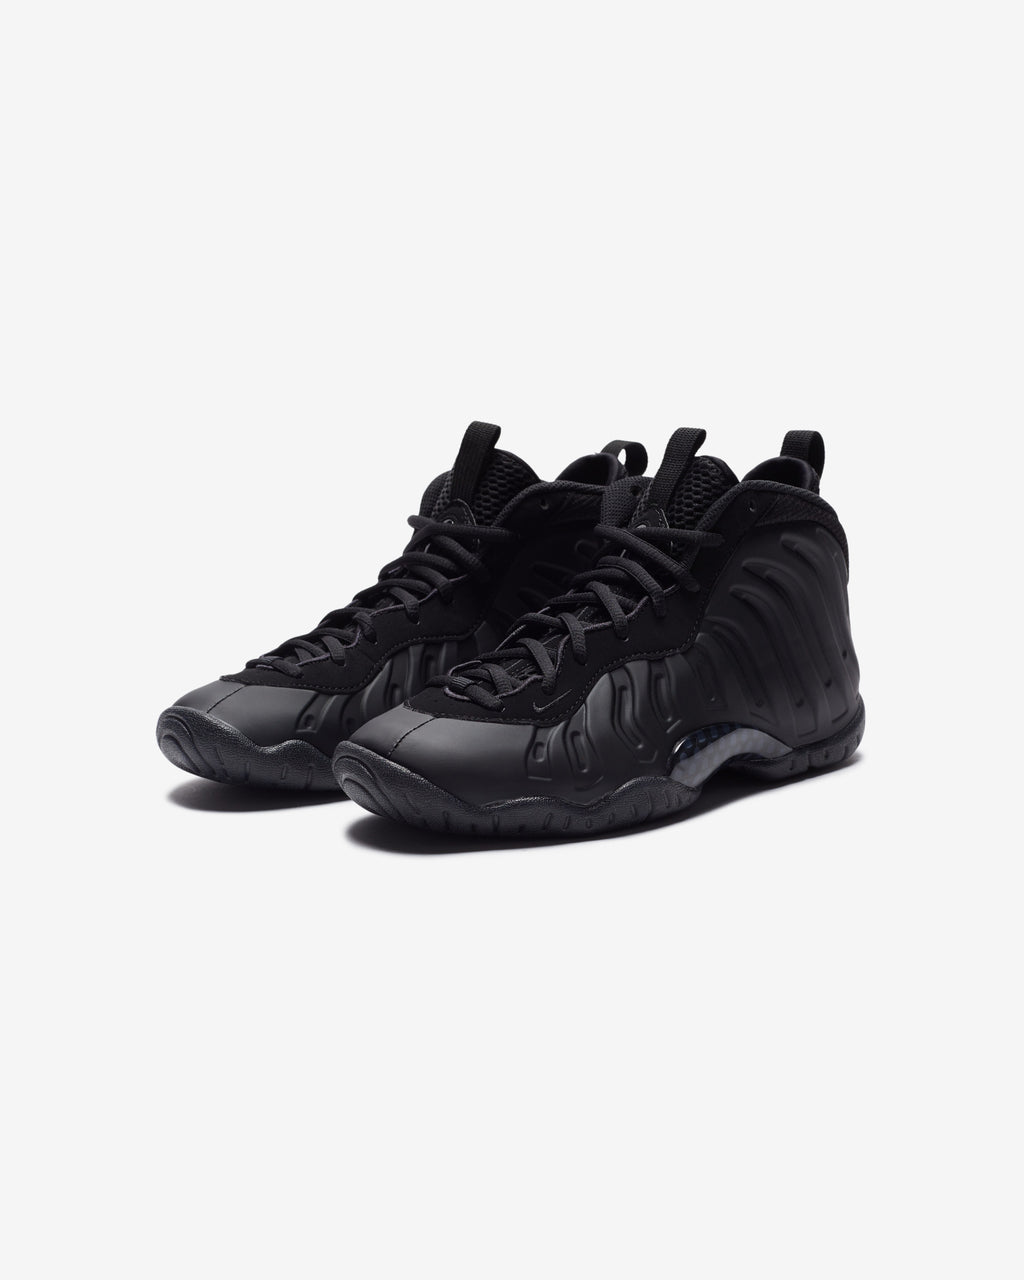 NIKE GS LITTLE POSITE ONE - BLACK/ ANTHRACITE